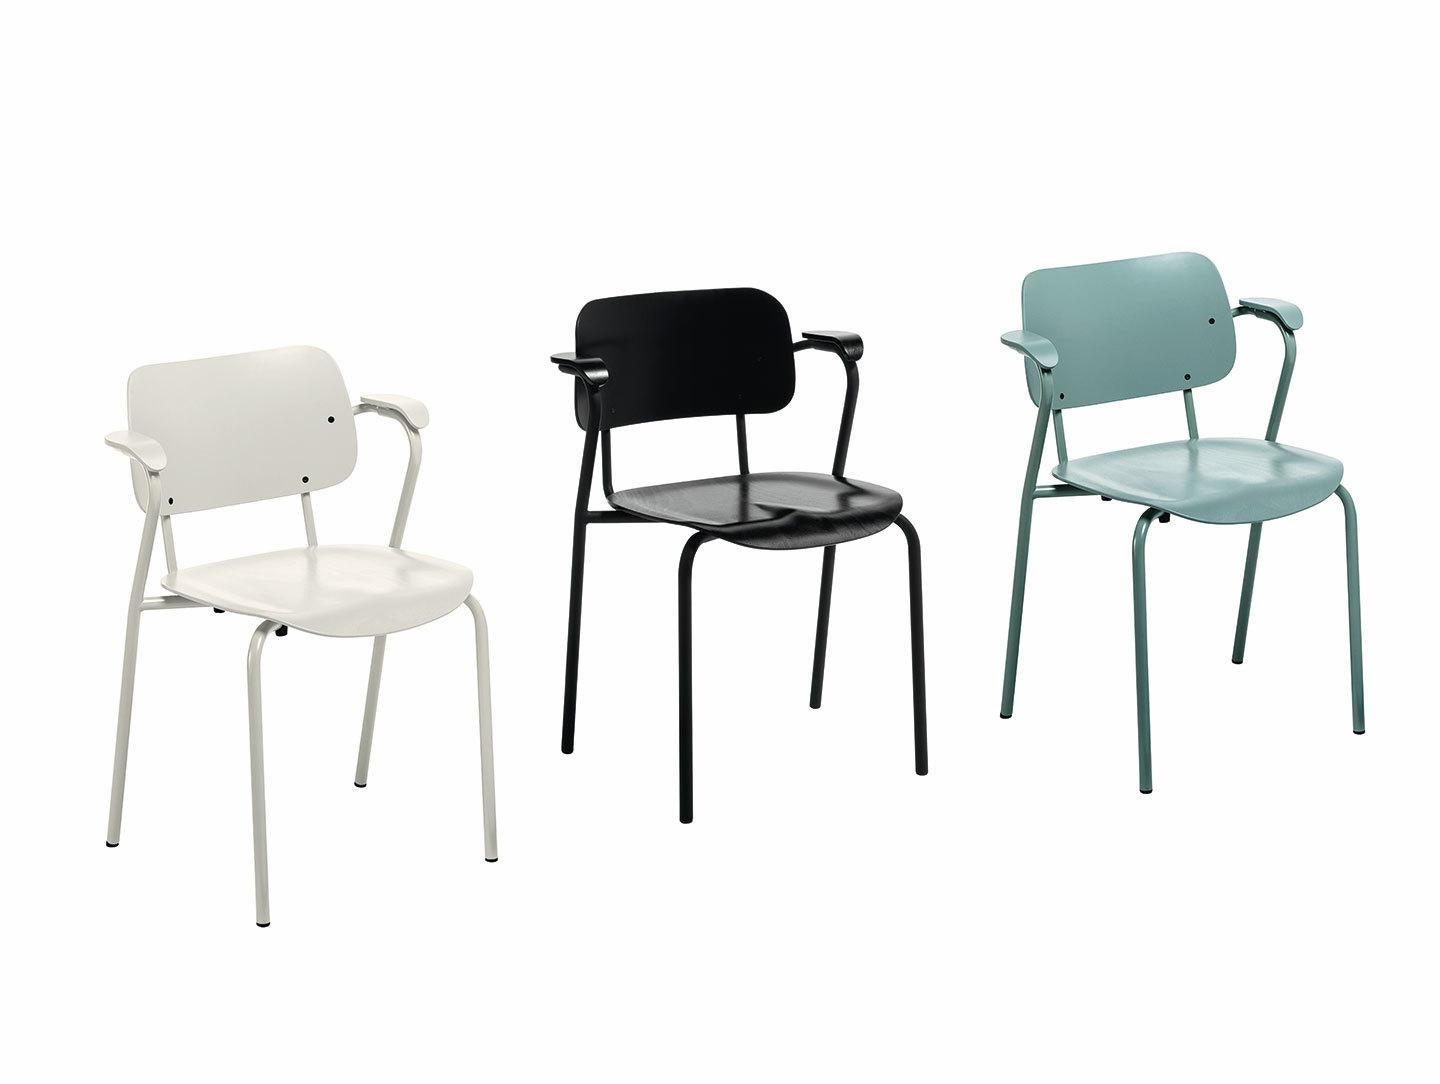 Lukki chair in stone white by Ilmari Tapiovaara & Artek. Ilmari Tapiovaara designed the Lukki collection for the student dormitories of the Helsinki University of Technology. Composed of tubular steel with a seat, back, and armrests formed from